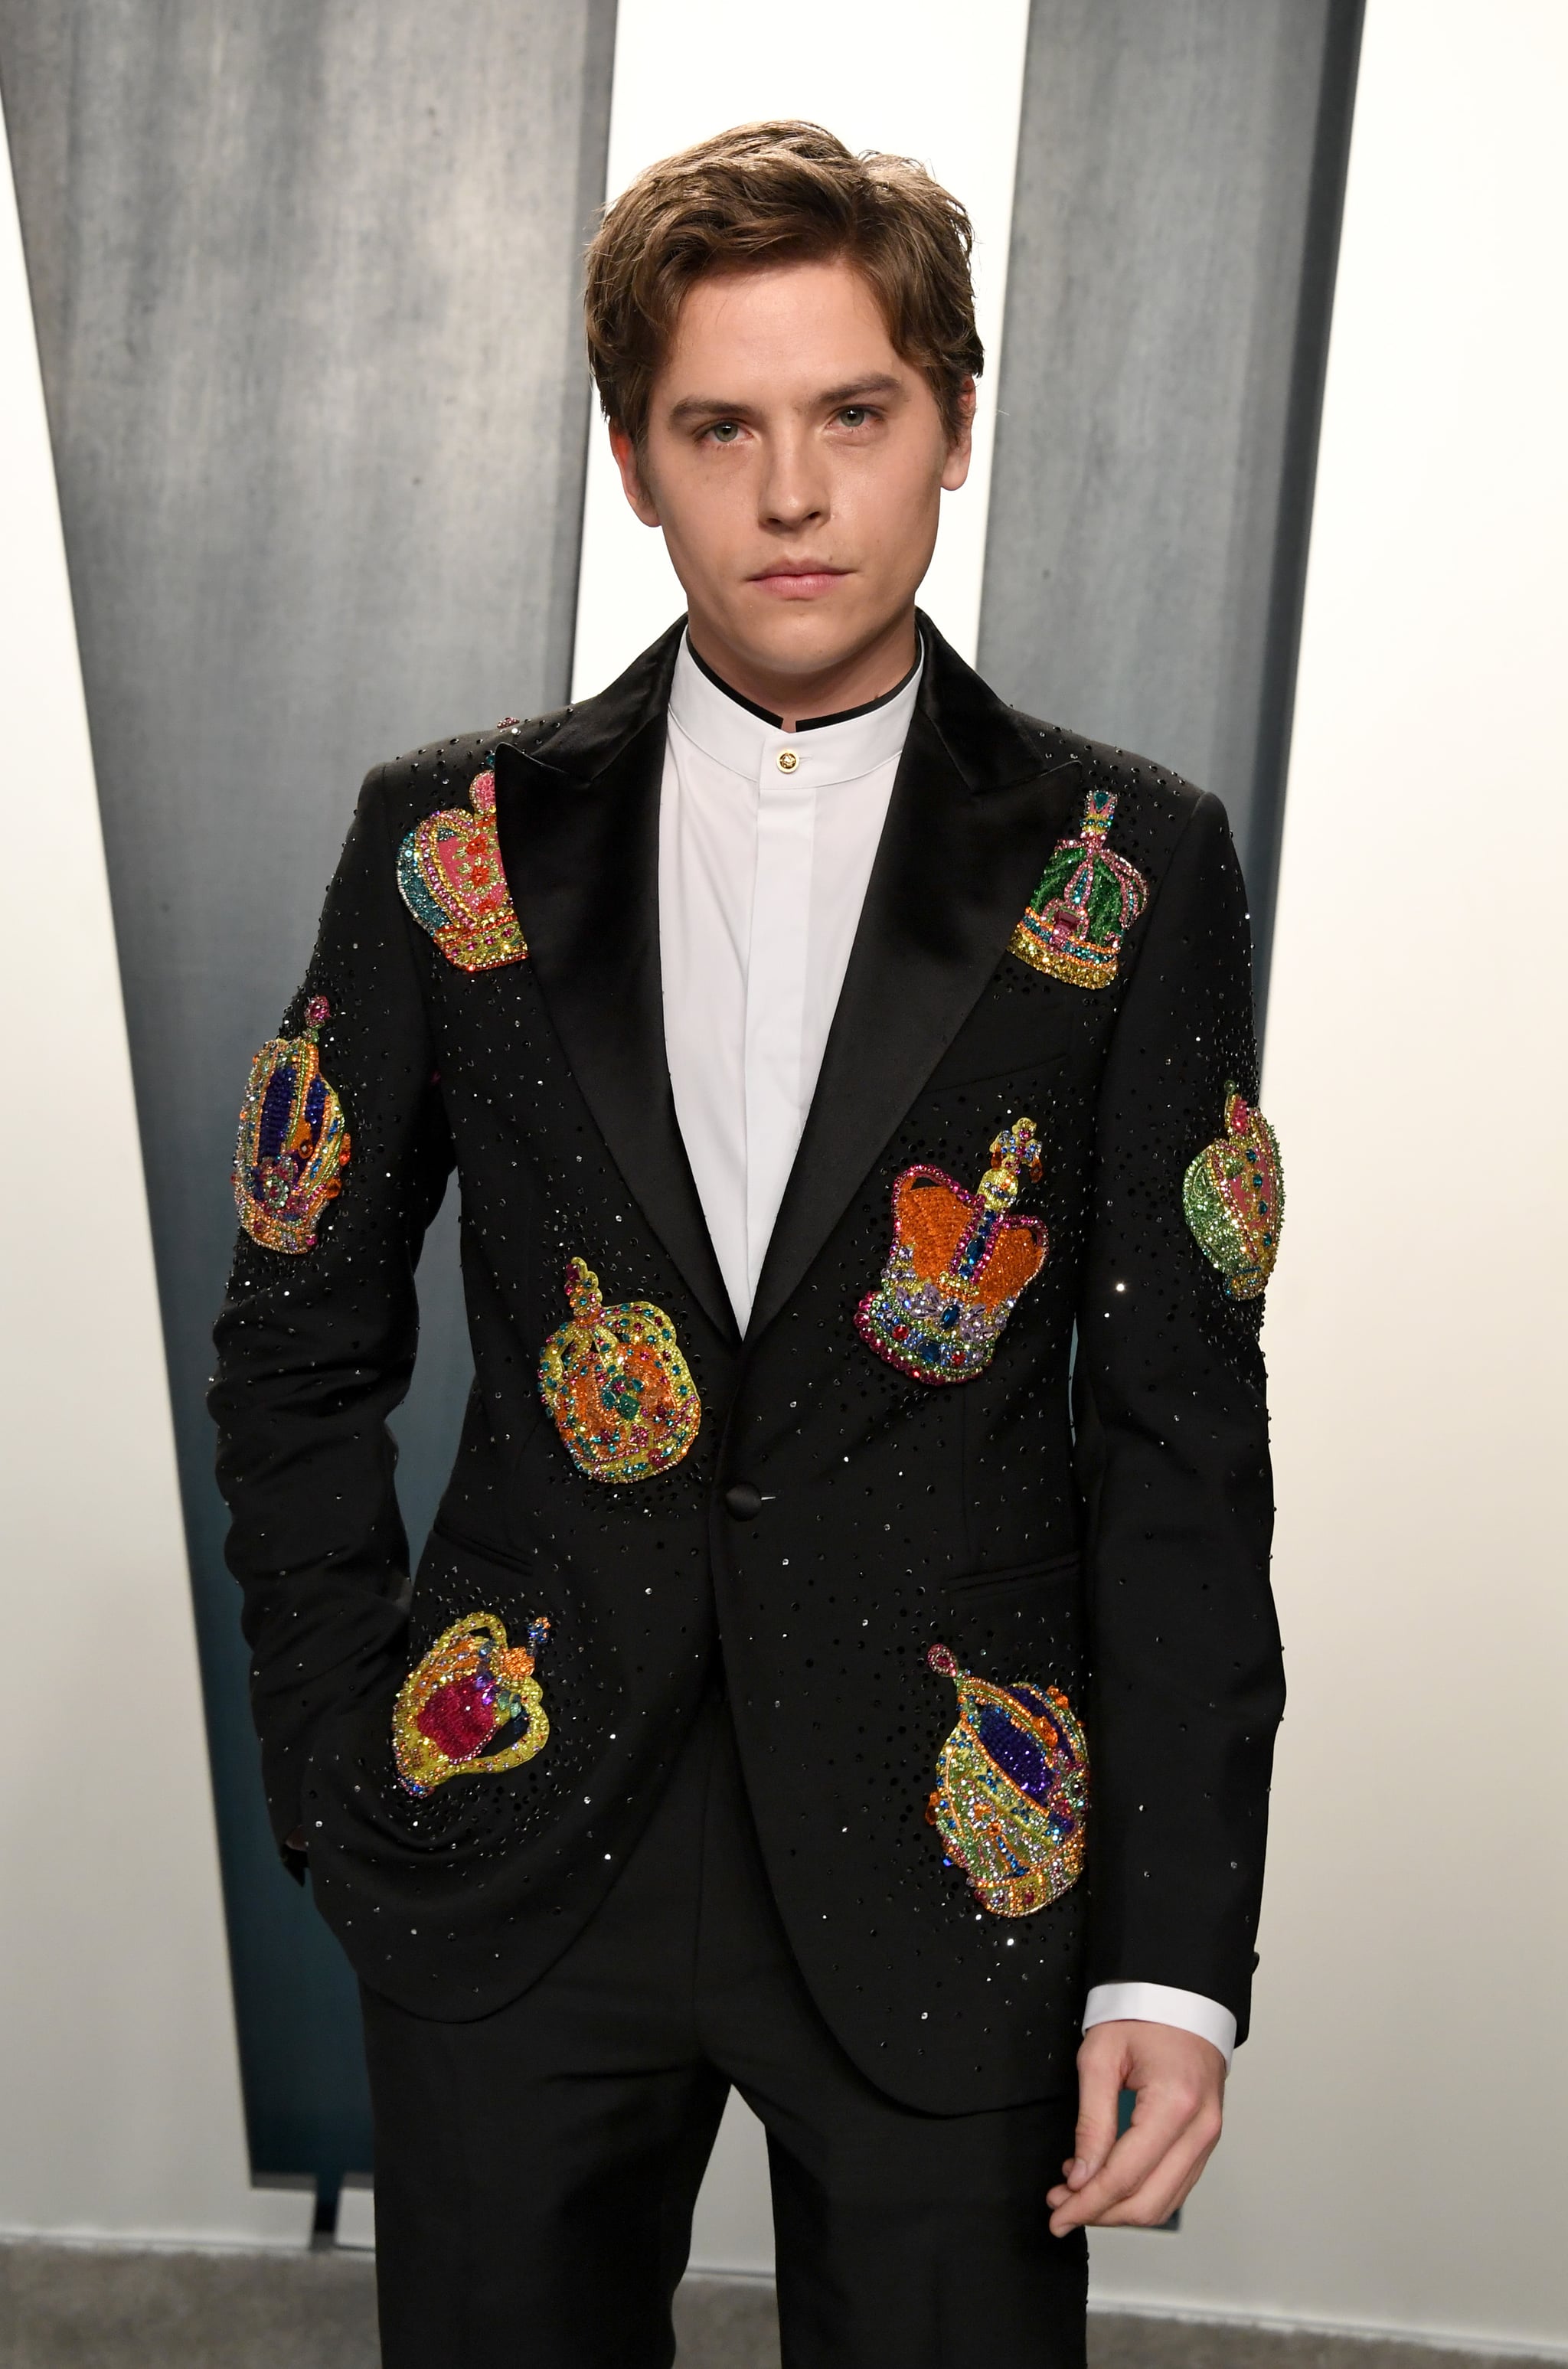 BEVERLY HILLS, CALIFORNIA - FEBRUARY 09: Dylan Sprouse attends the 2020 Vanity Fair Oscar Party hosted by Radhika Jones at Wallis Annenberg Centre for the Performing Arts on February 09, 2020 in Beverly Hills, California. (Photo by Jon Kopaloff/WireImage)